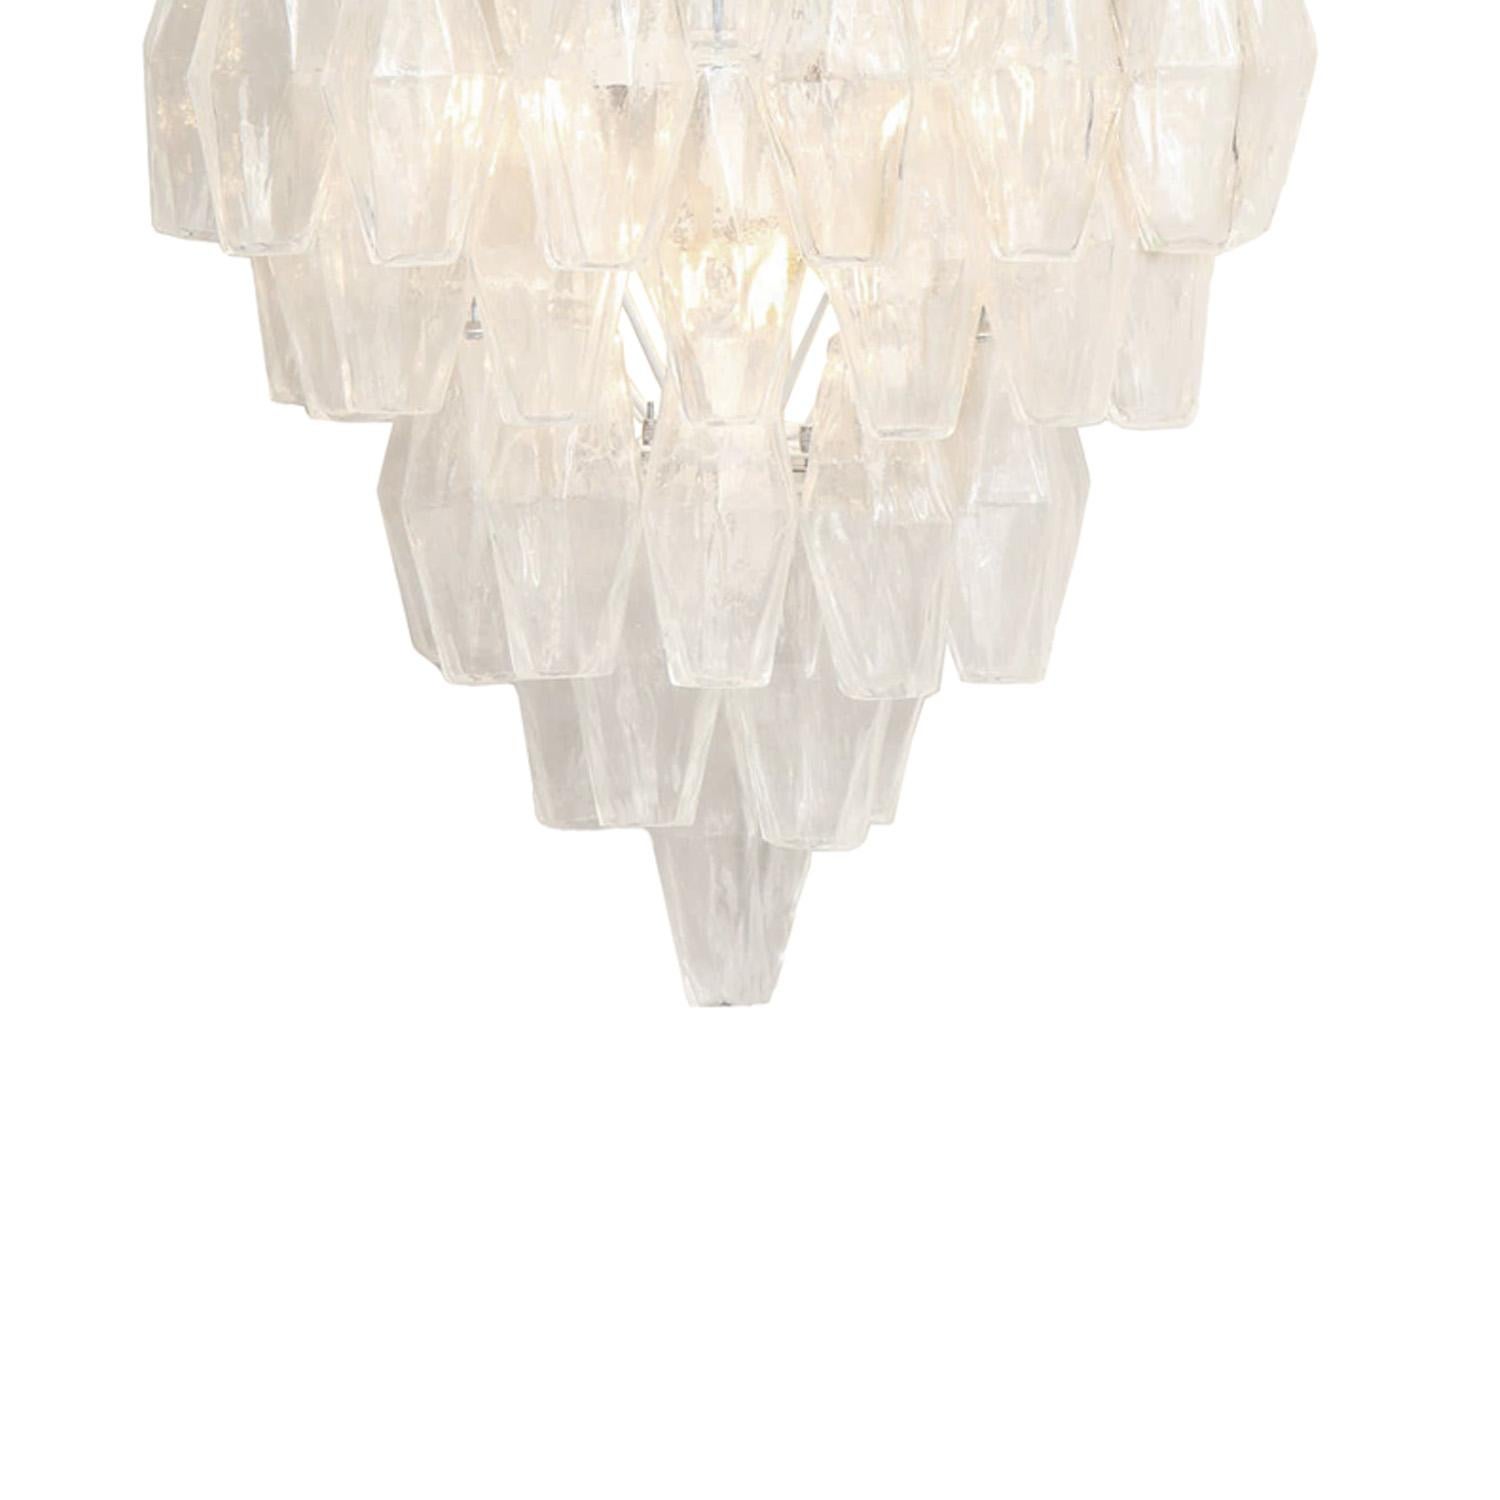 Artisan Pair of Murano Glass Polyhedron Sconces 2000 In Good Condition For Sale In New York, NY